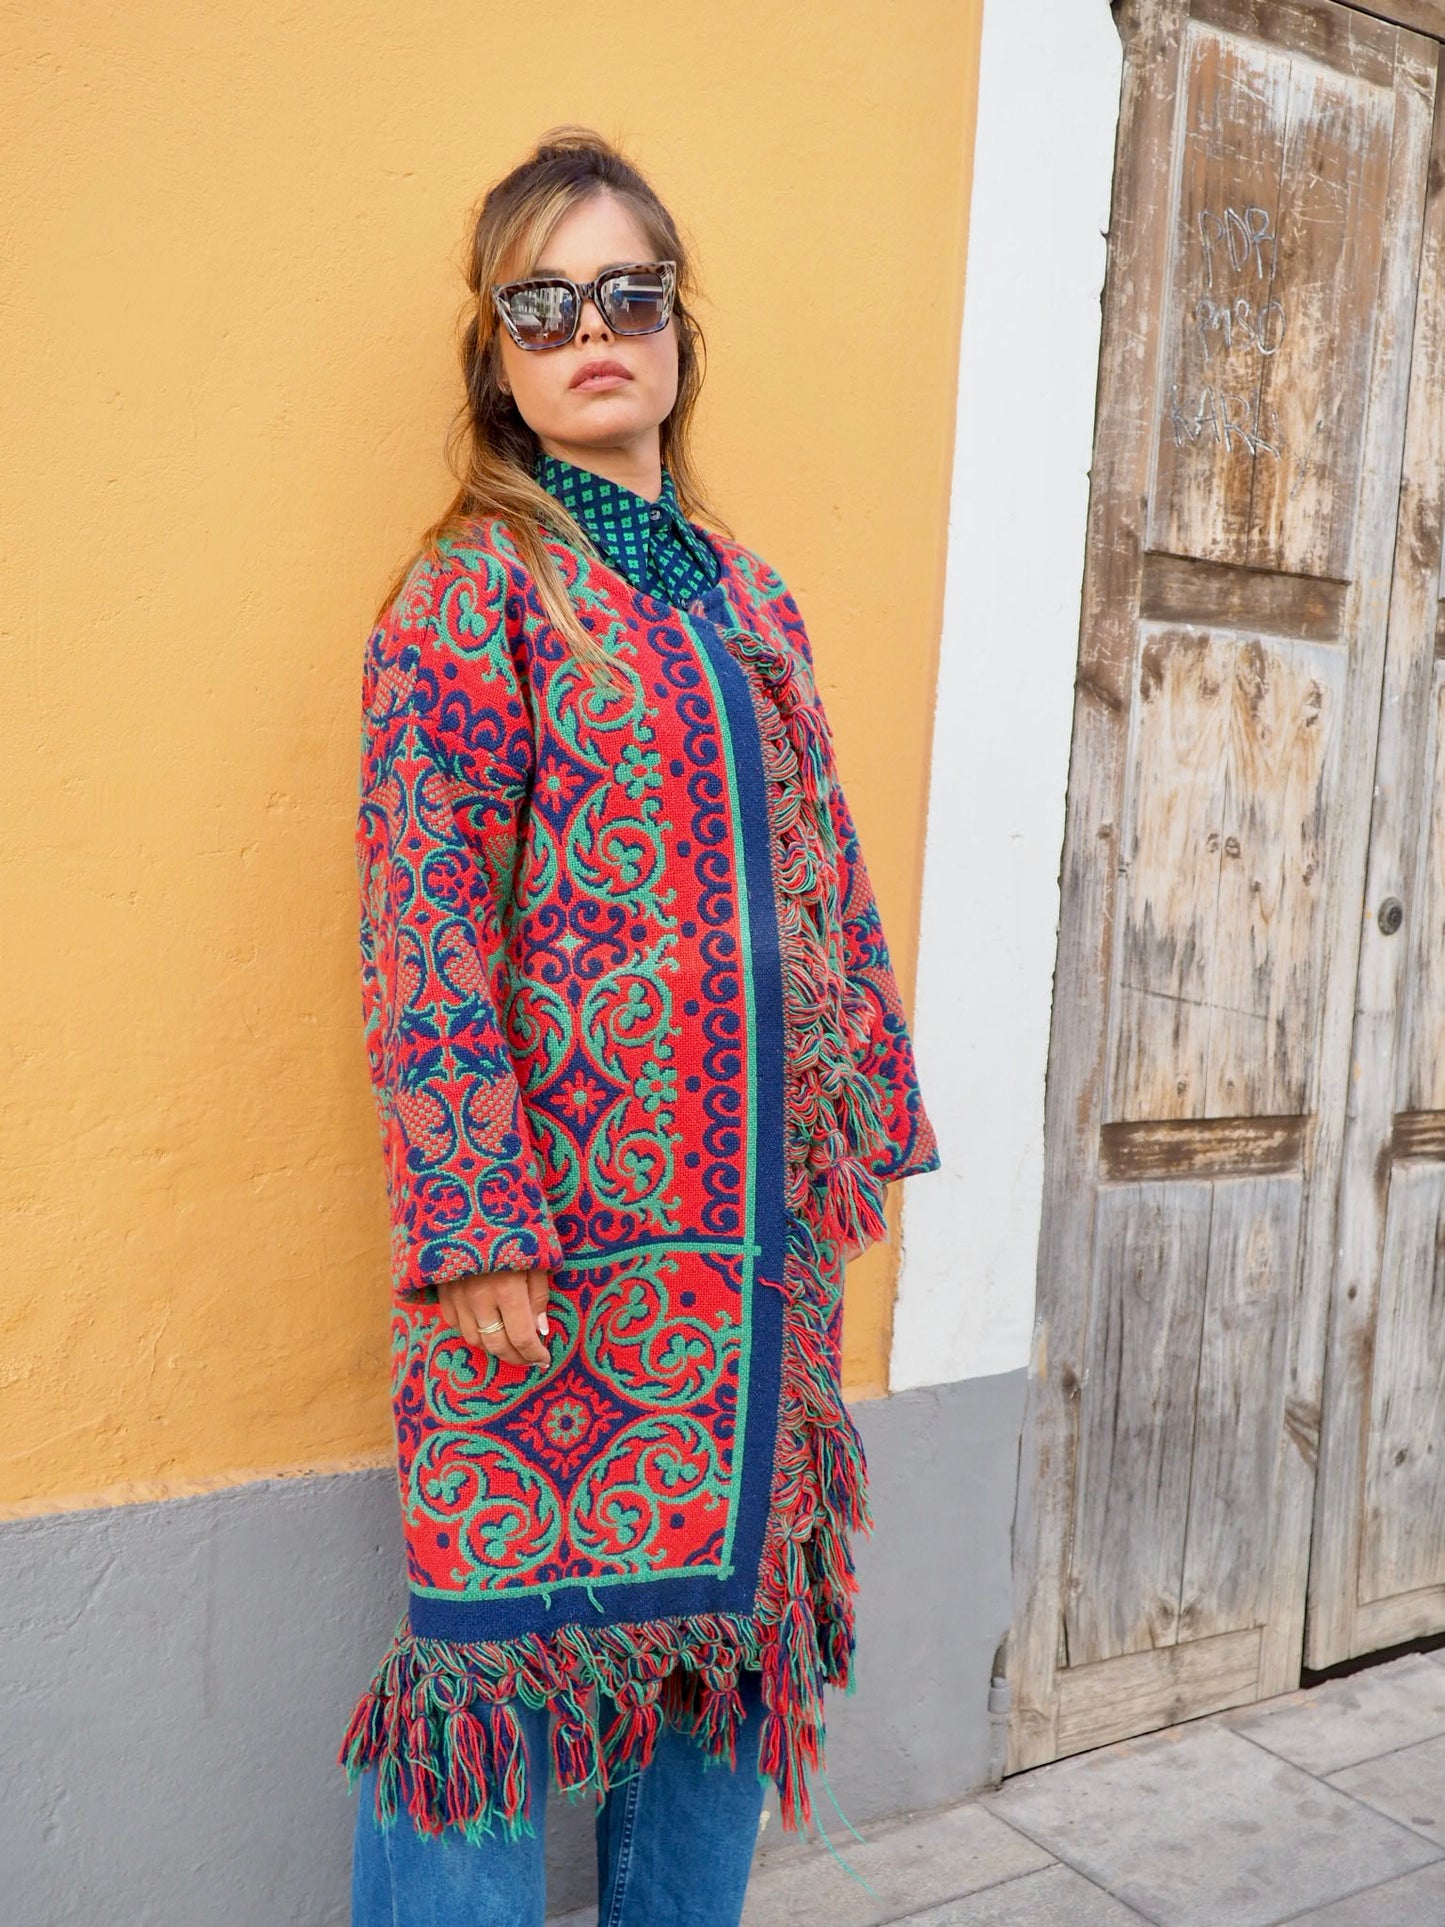 Amazing one off a kind woven tapestry jacket with oversize tassels trimming up-cycled jacket made by Vagabond Ibiza